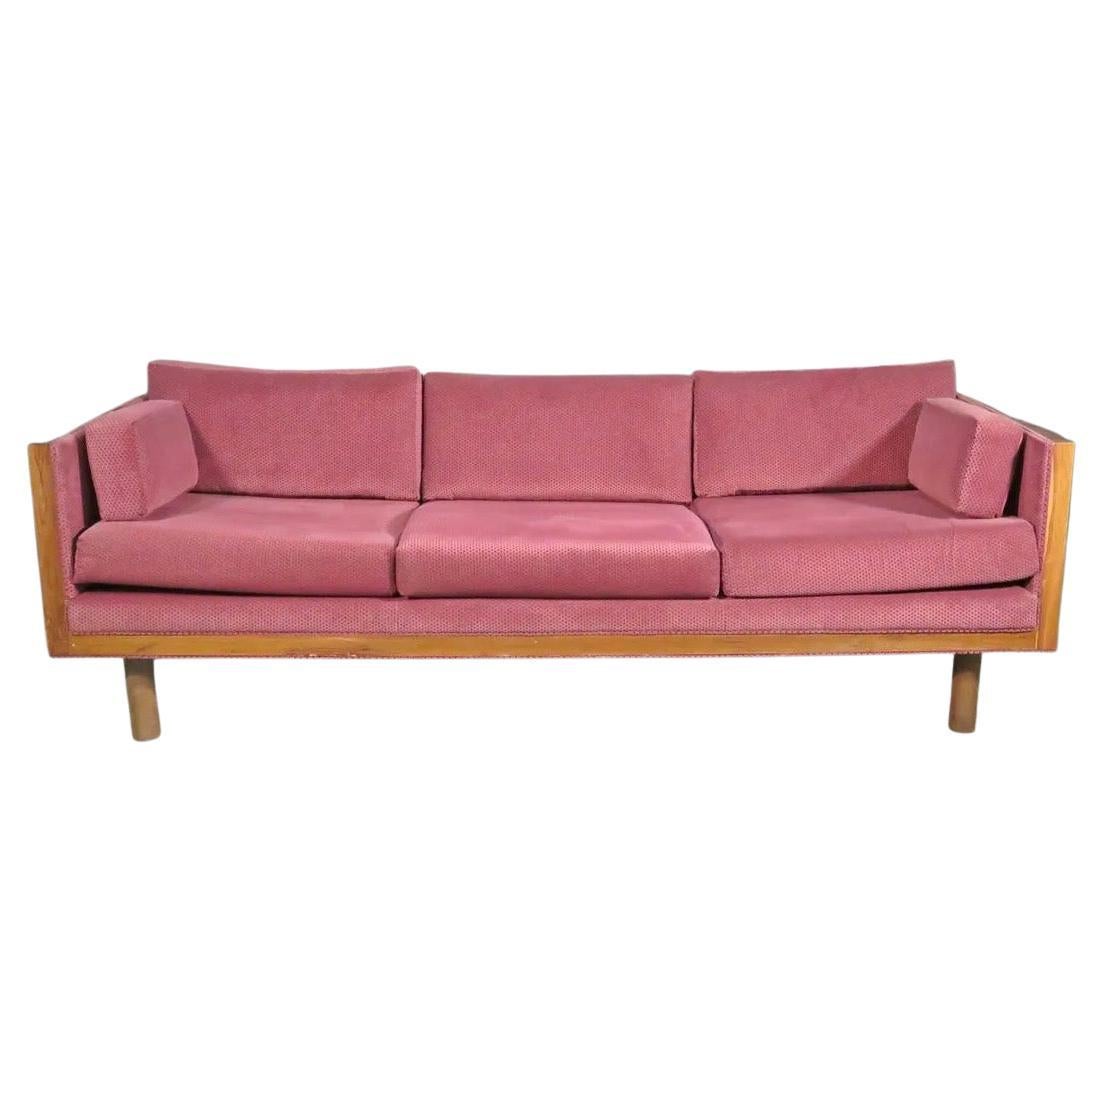 Mid-Century Rosewood Sofa in the Style of Milo Baughman